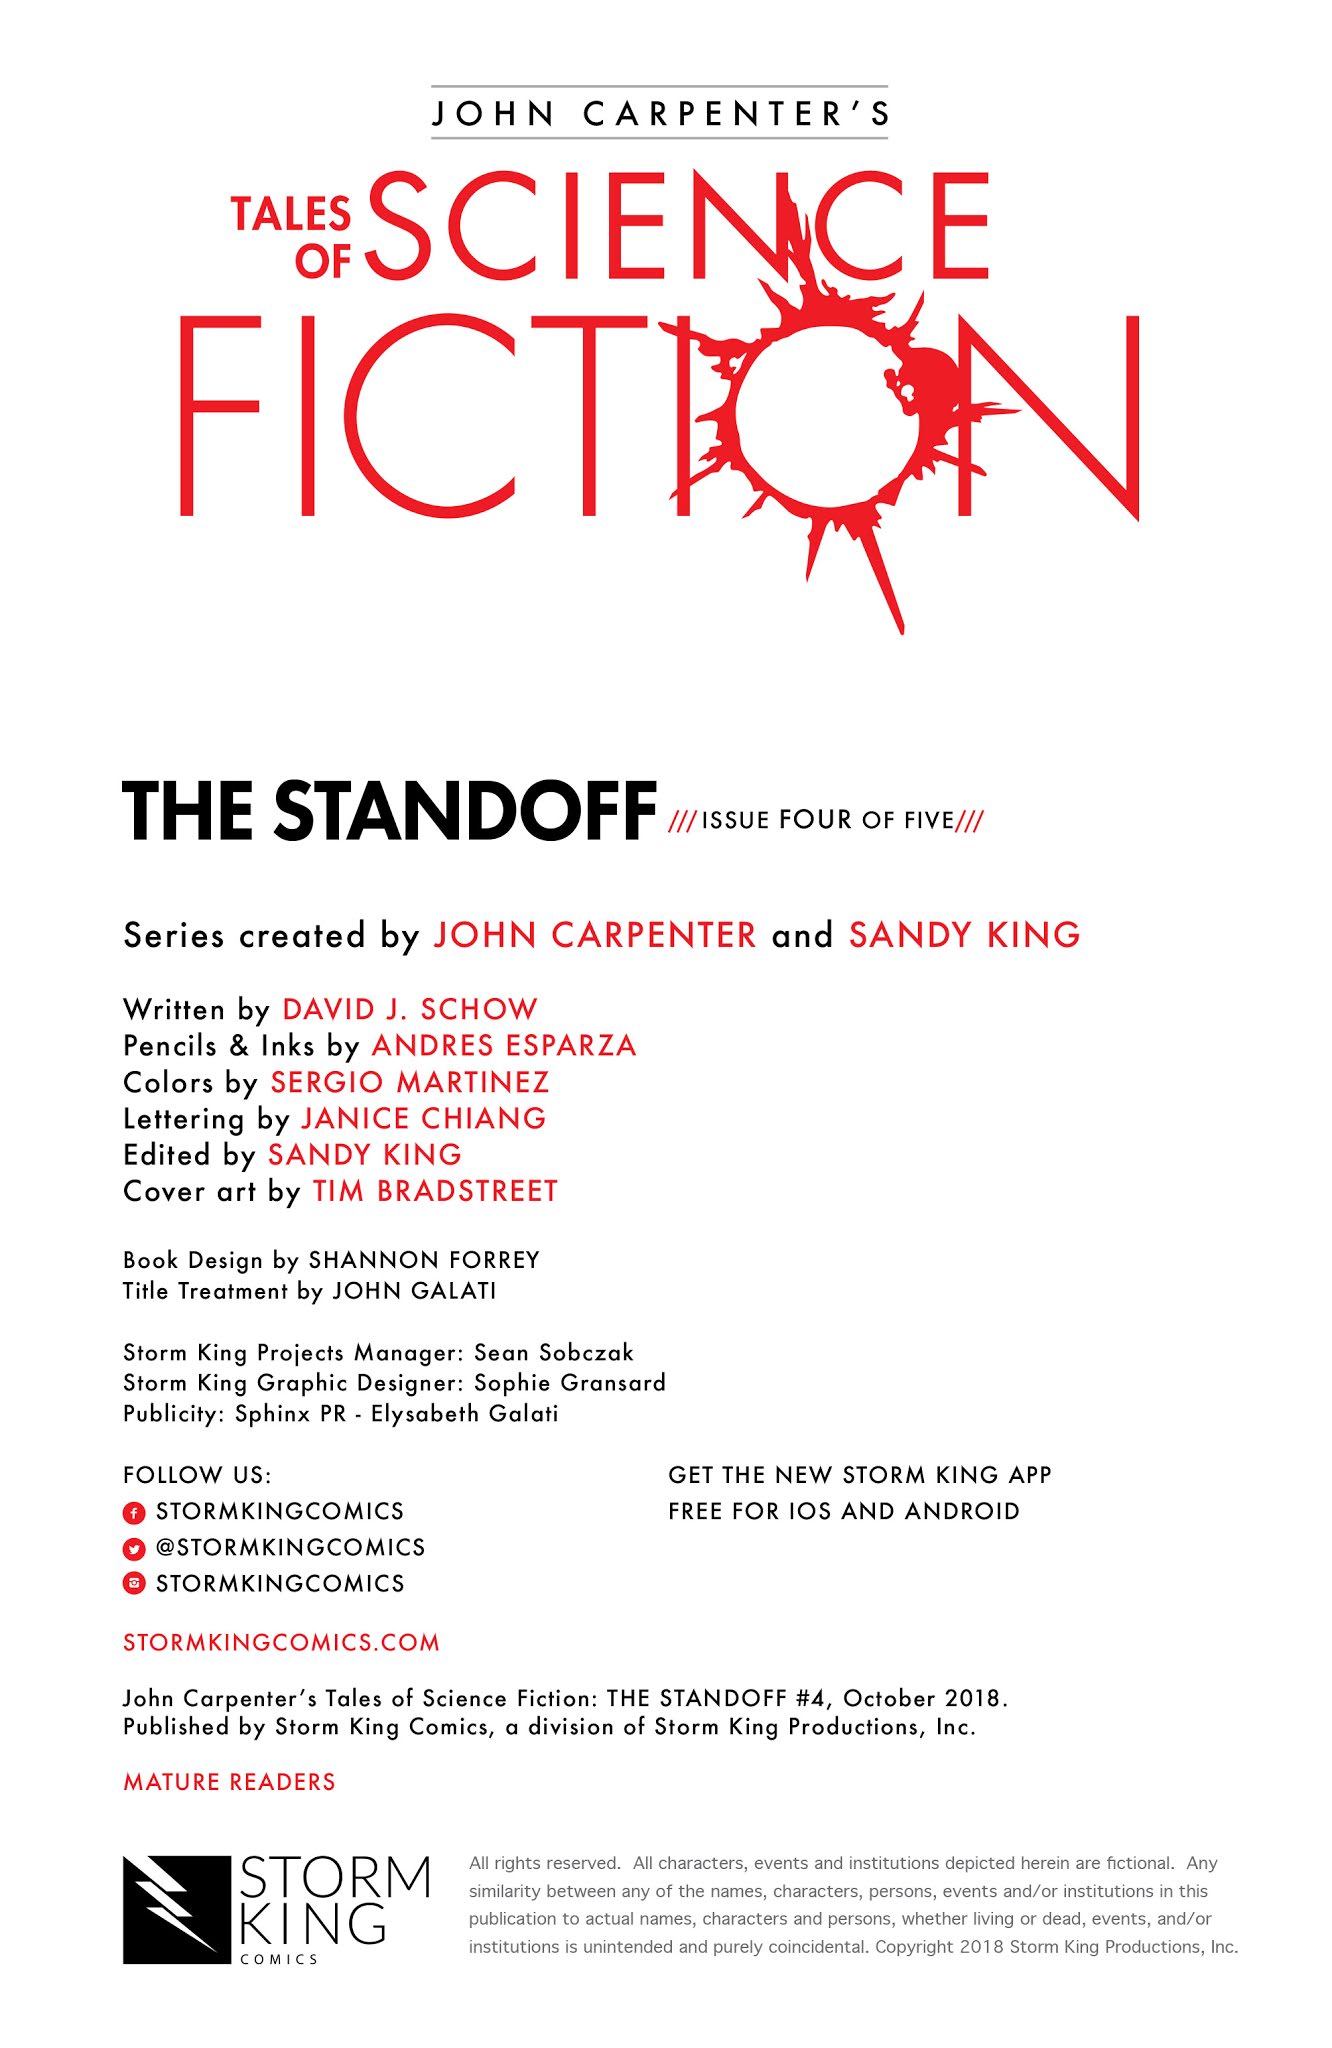 Read online John Carpenter's Tales of Science Fiction: The Standoff comic -  Issue #4 - 2